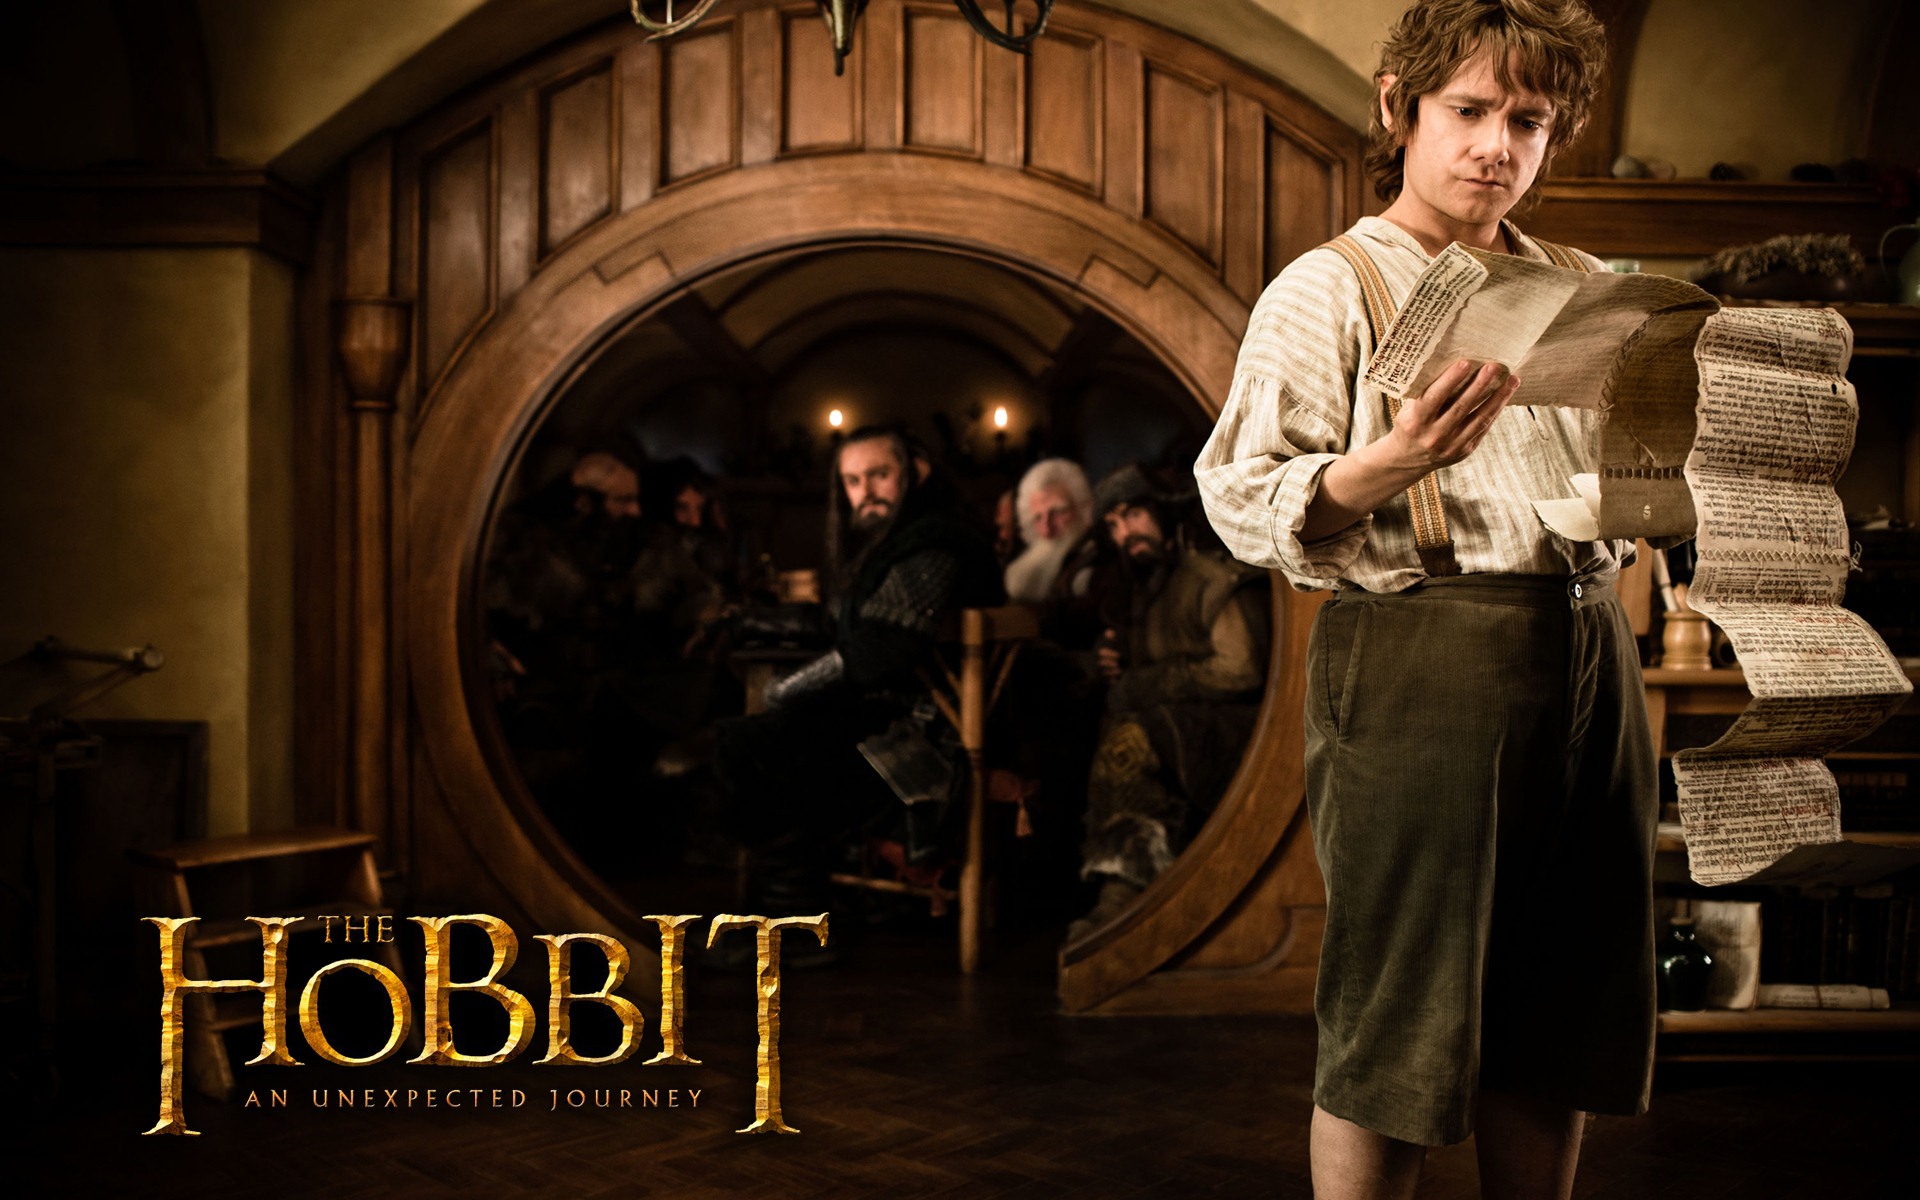 The Hobbit: An Unexpected Journey HD wallpapers #11 - 1920x1200